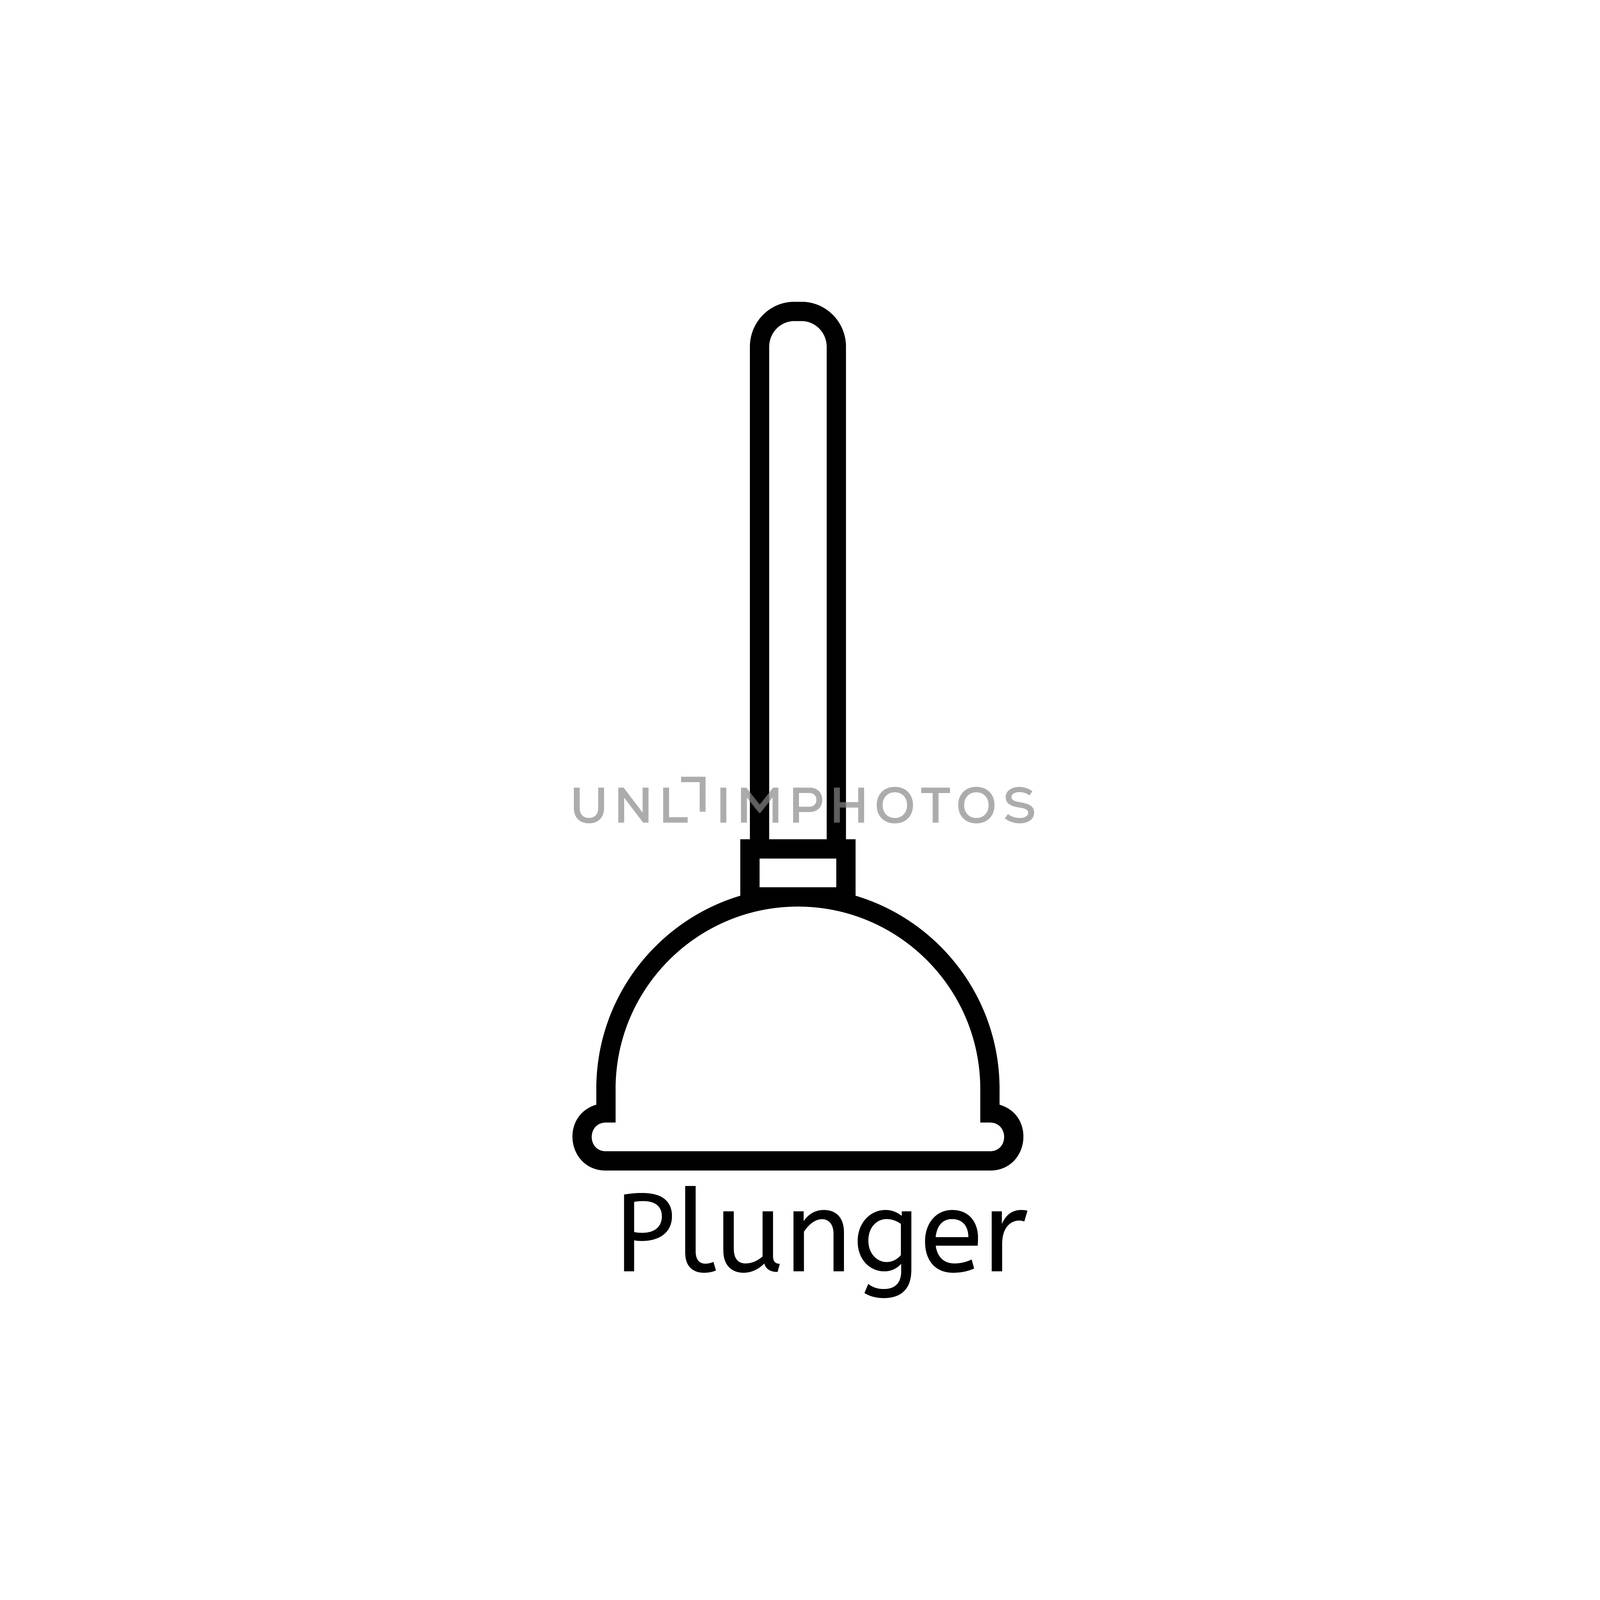 Toilet plunger simple line icon. Plumber equipment thin linear signs. Bathroom cleaning simple concept for websites, infographic, mobile app